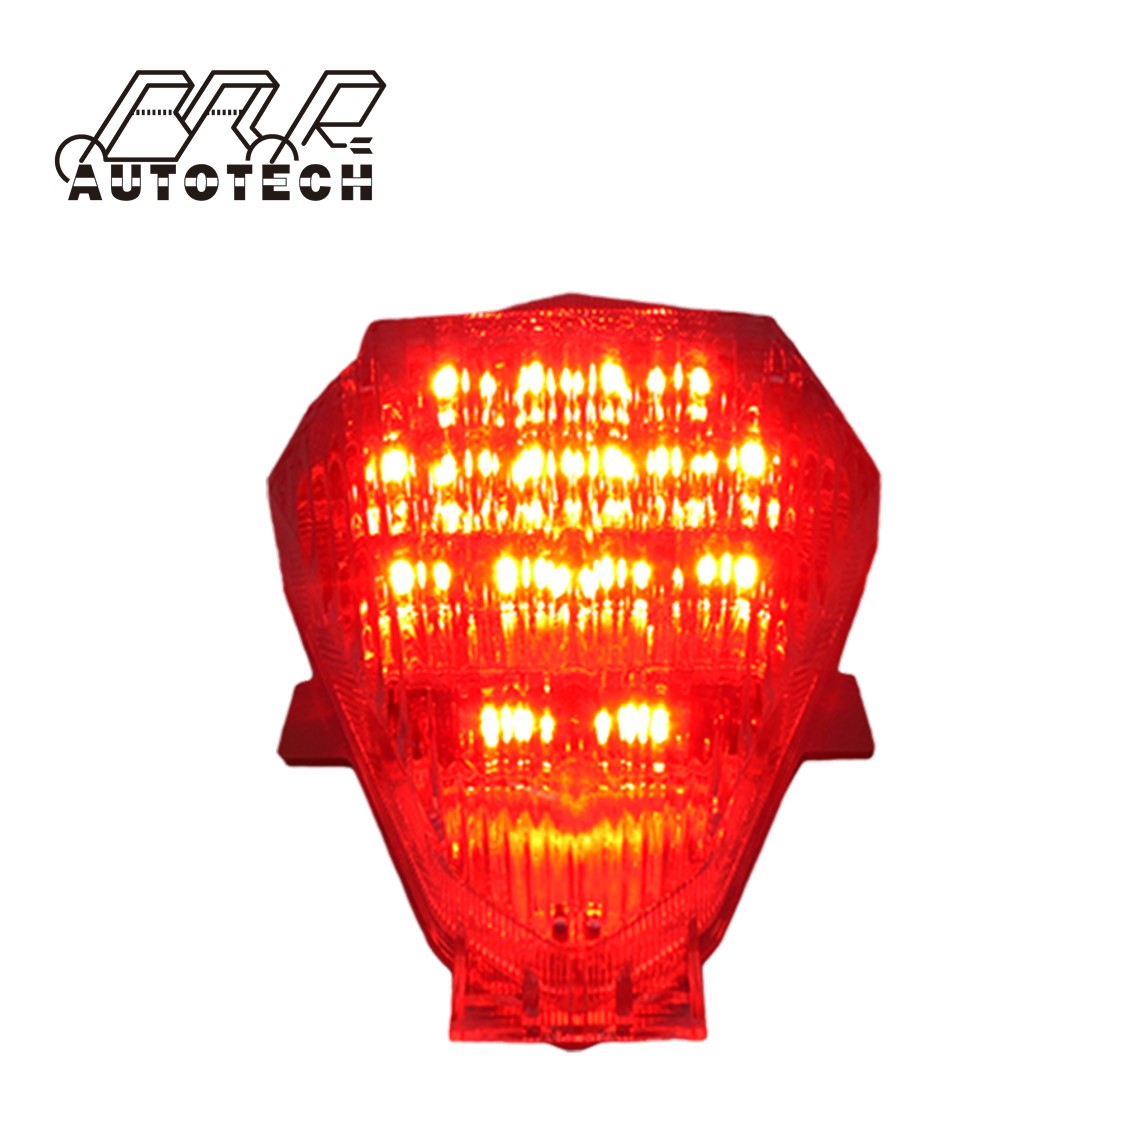 For Yamaha YZF R6 motorcycle integrated rear light for brake lamp